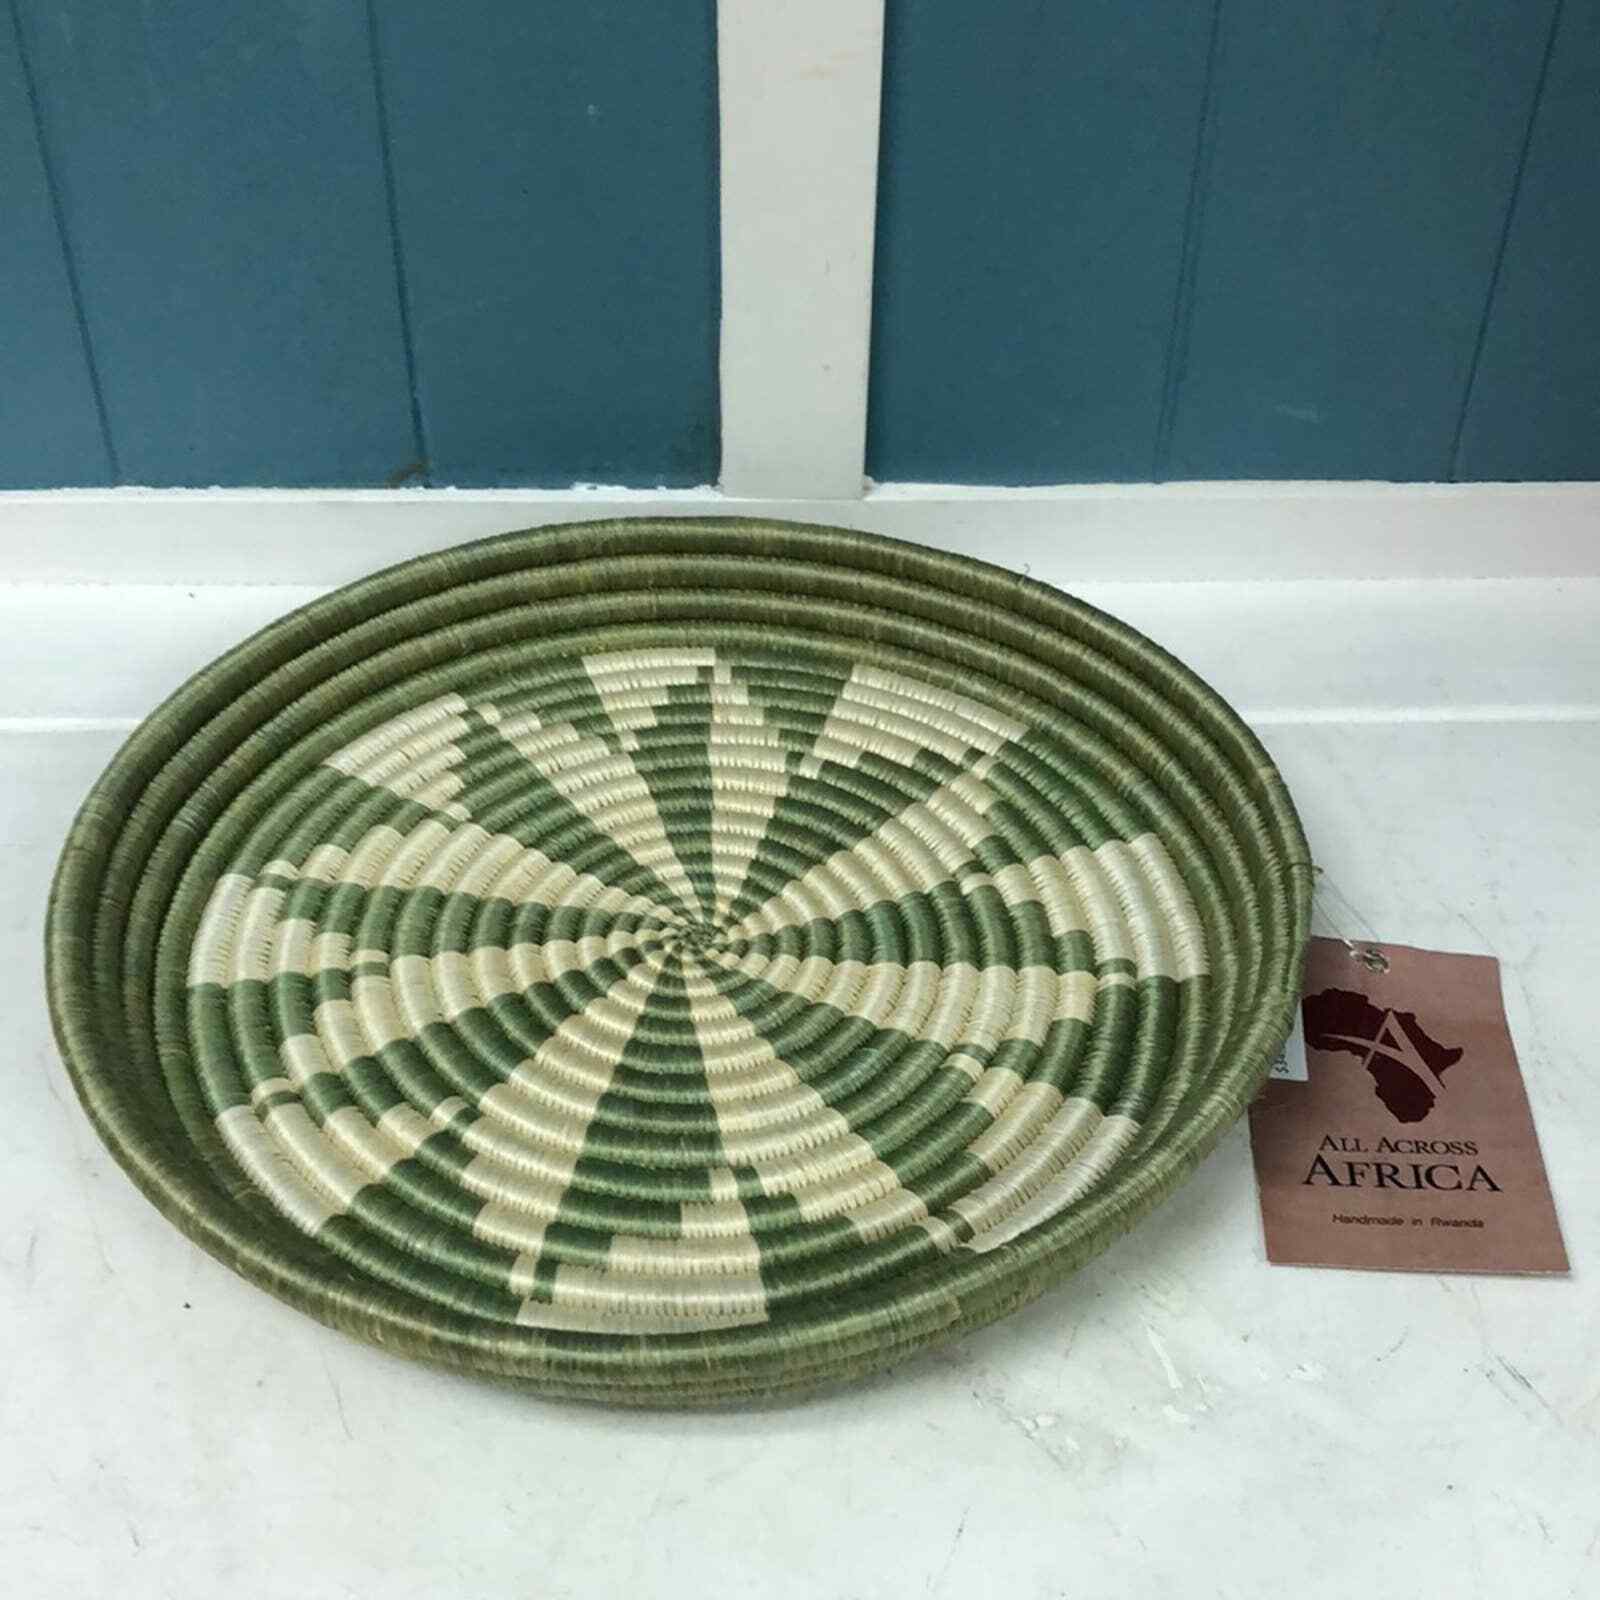 All Across Africa 12” Rwandan Tray green & ivory New with tag